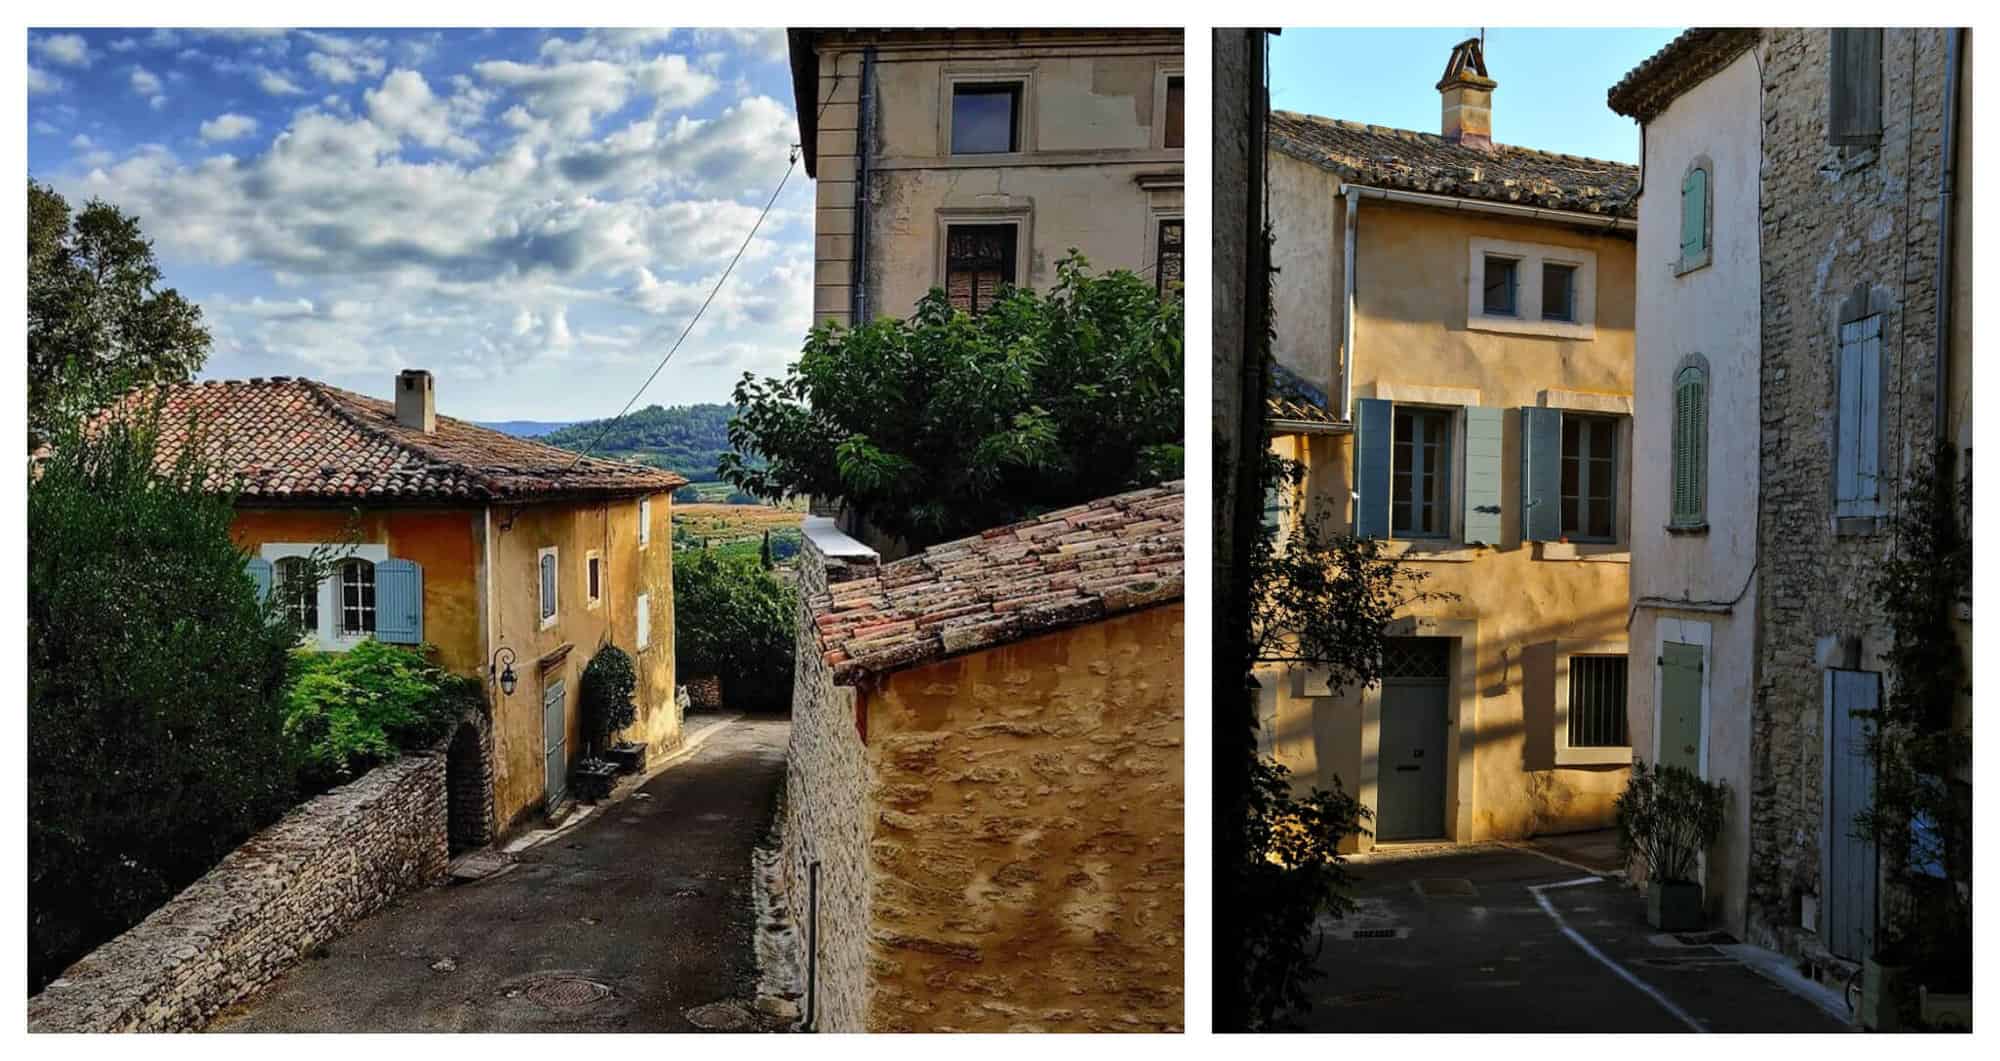 Left: a French country road in a hidden hilltop village of Provence, with a red-tiled roof house on the left and two historic Mediterranean houses on the right, and a view of green mountains and a partly cloudy sky. Right: a small country road in the South of France with a yellow house and blue shutters in front and a stone building with green and blue shutters to the left